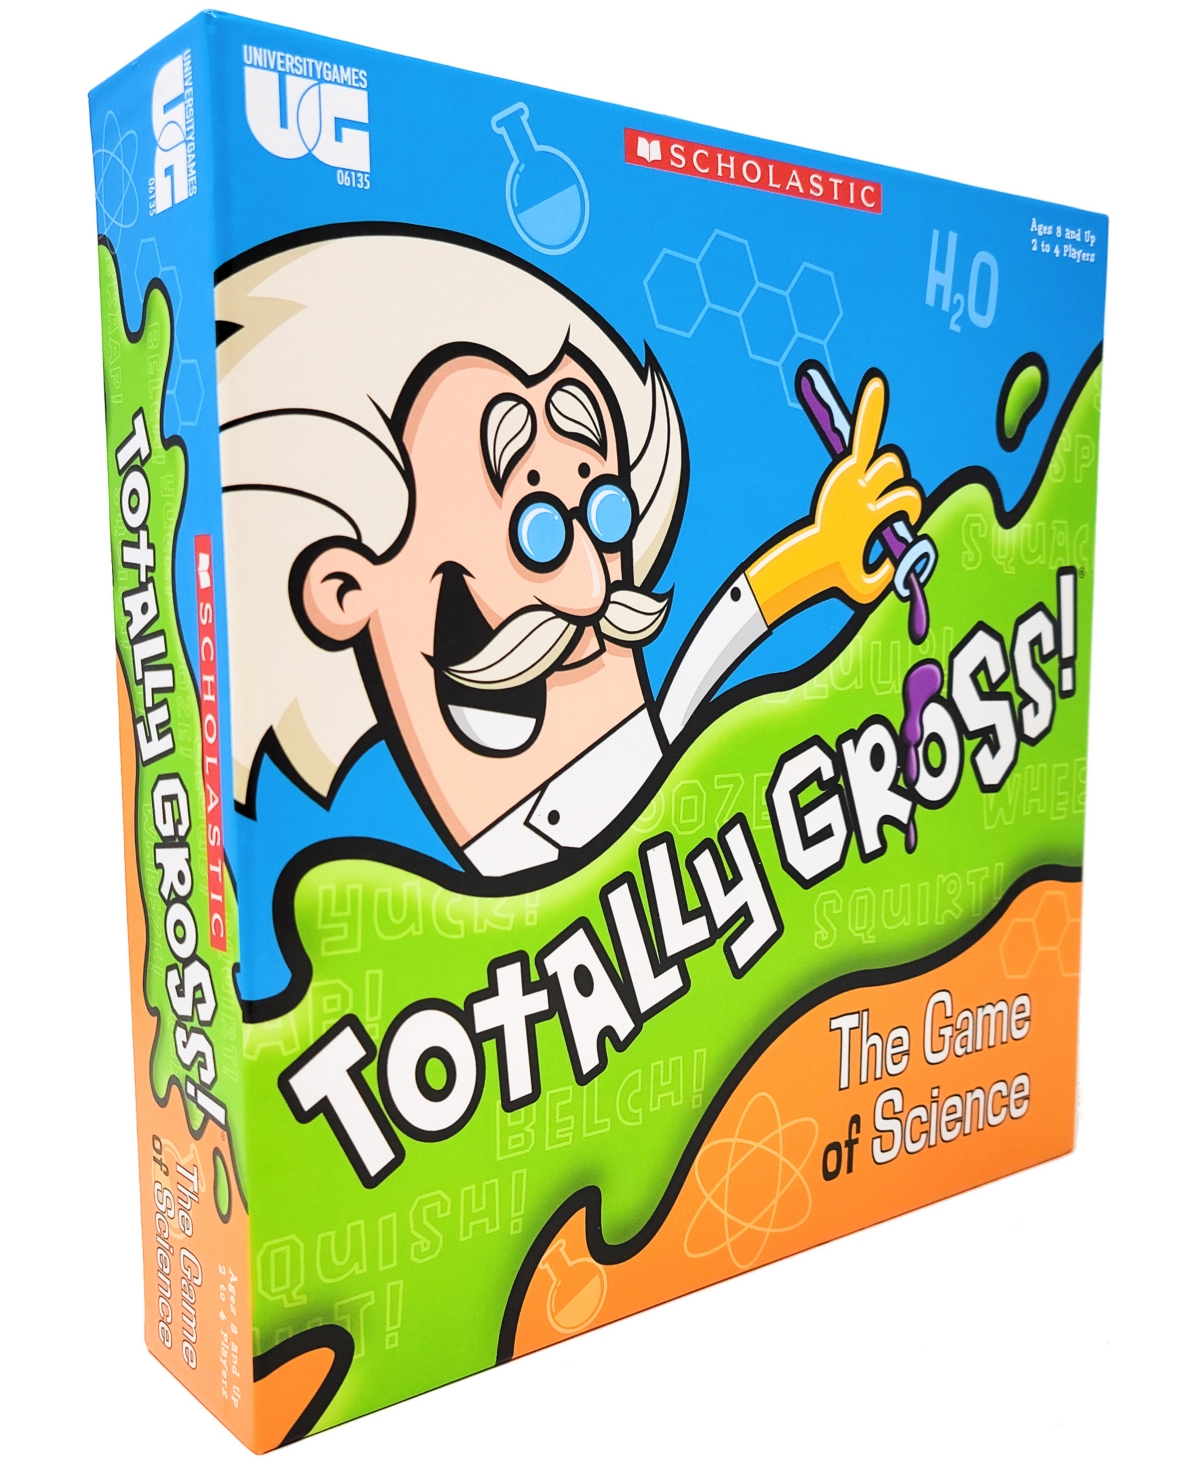 Areyougame Kids' University Games Scholastic Totally Gross The Game Of Science In No Color